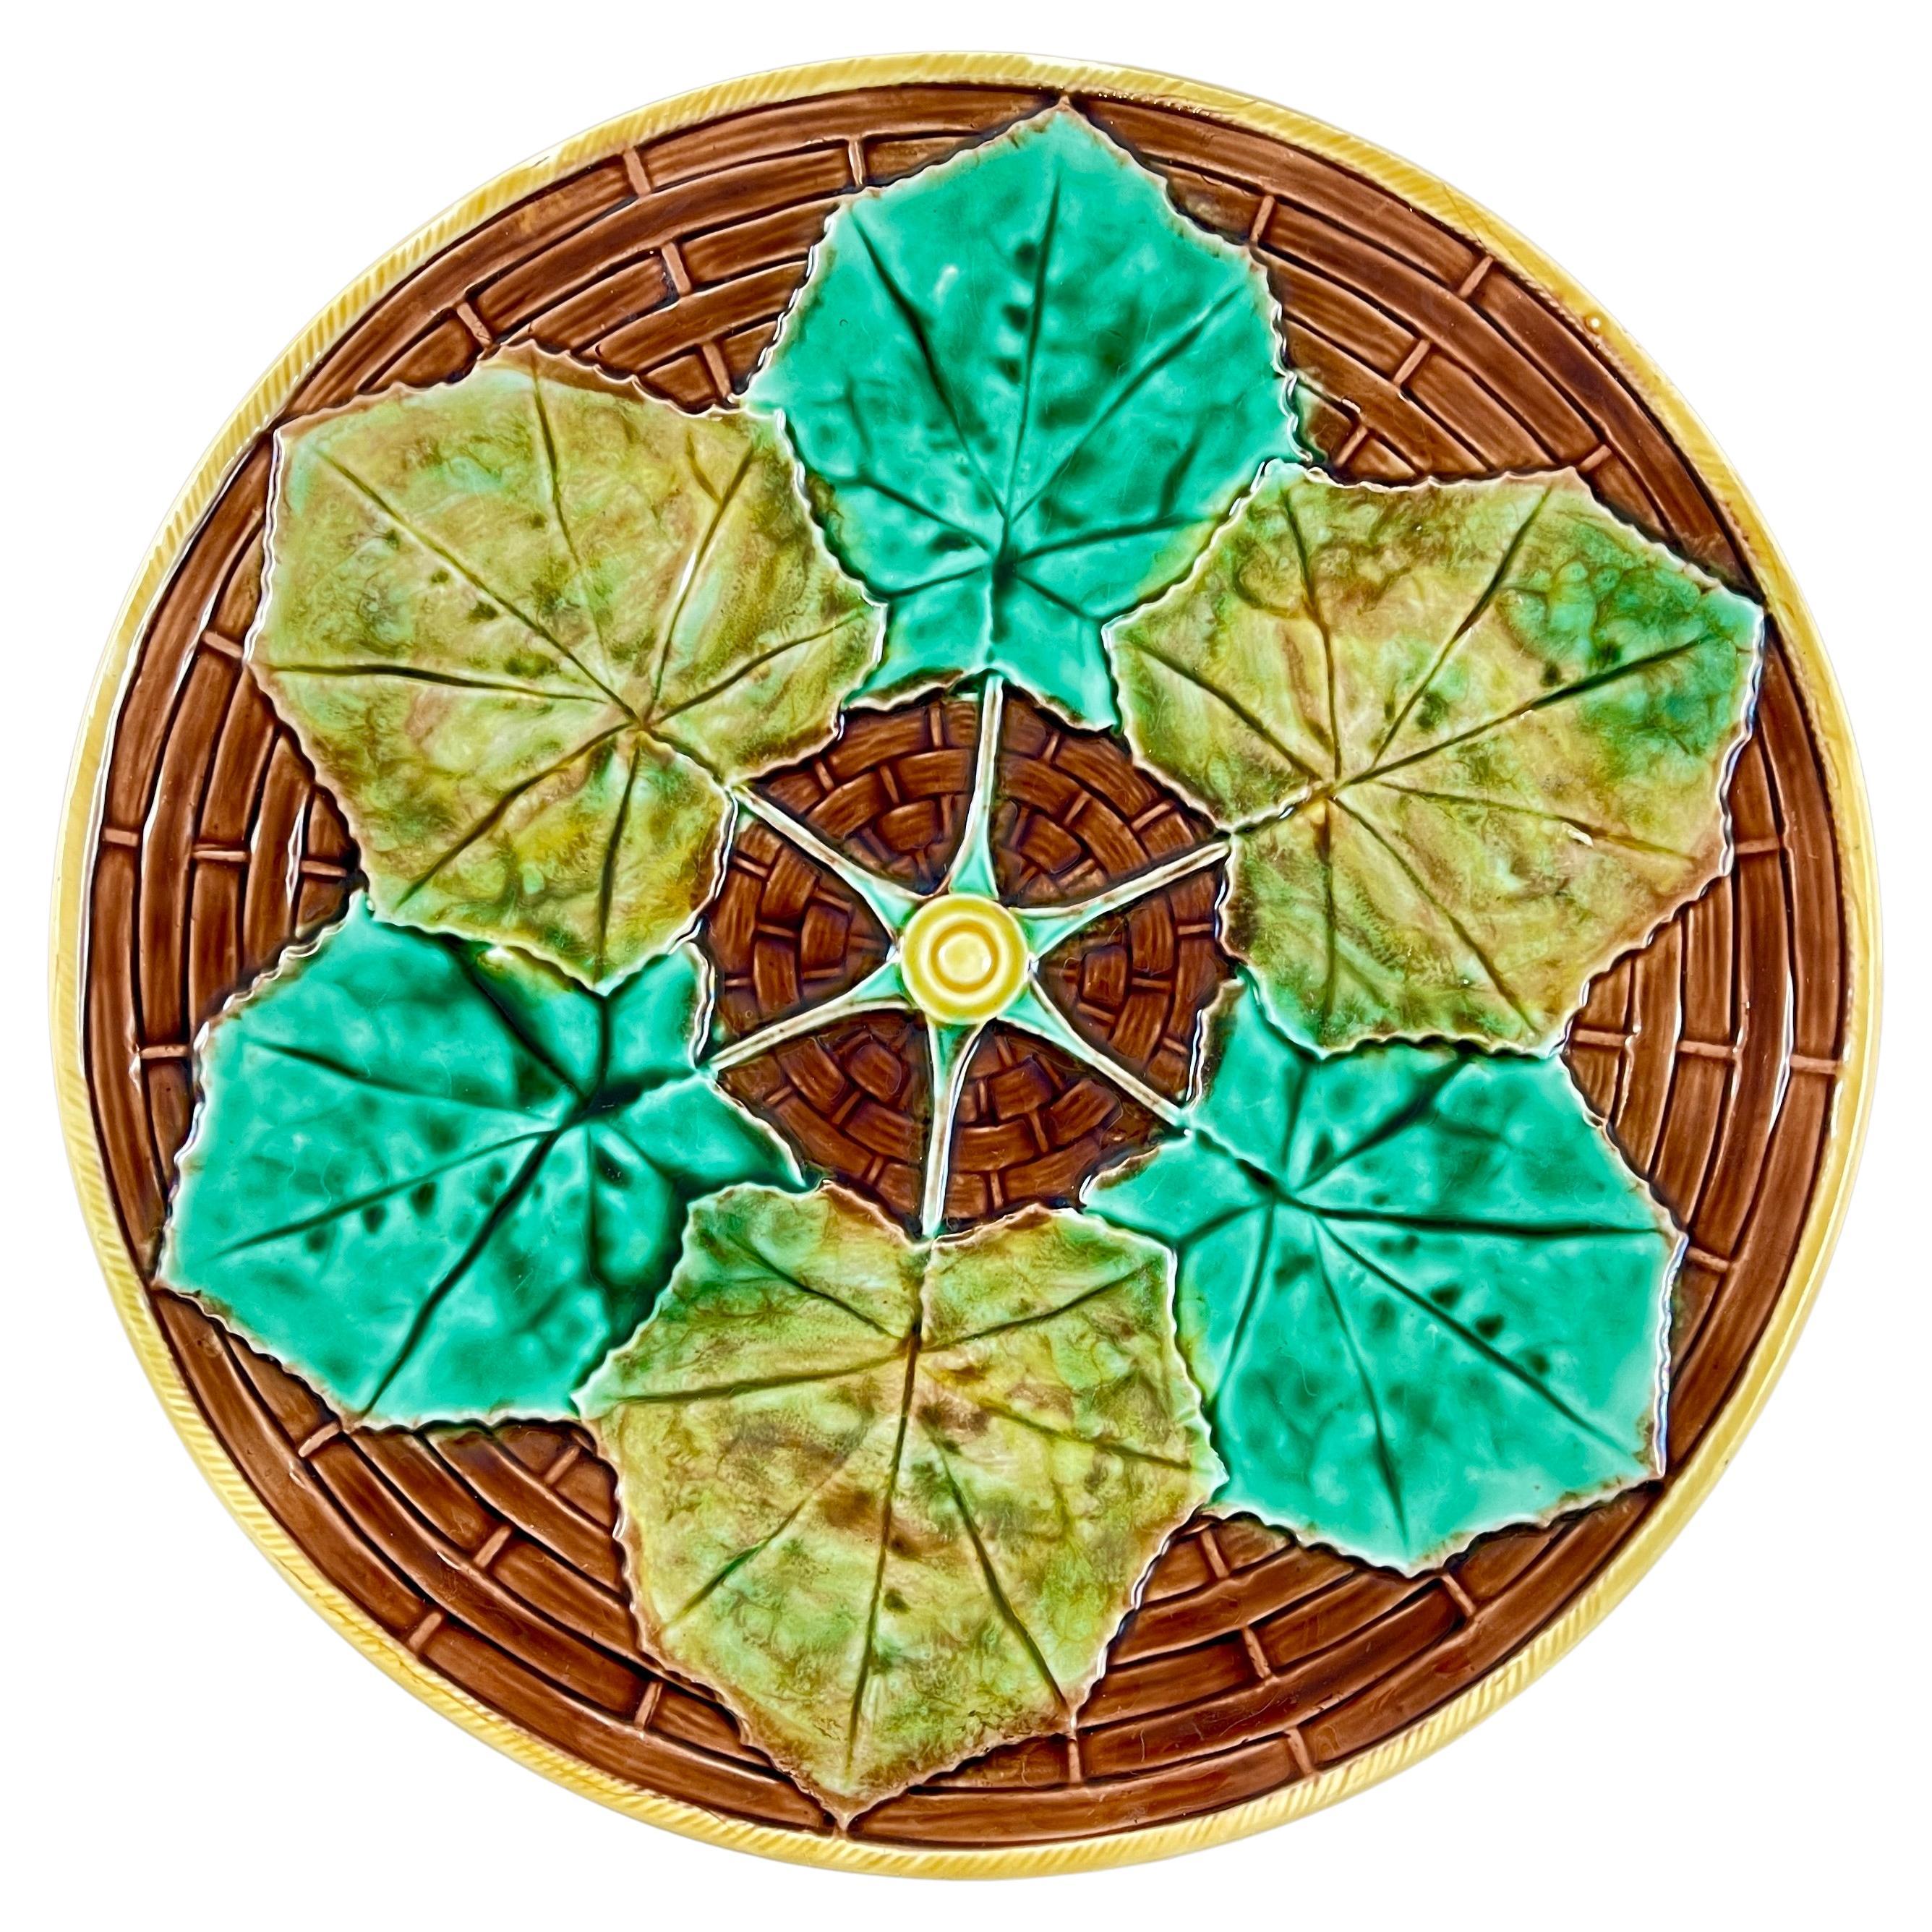 Adams & Bromley English Majolica Overlapping Leaf on Basketweave Cheese Tray (Plateau à fromage en majolique anglaise avec feuilles superposées et tresse)